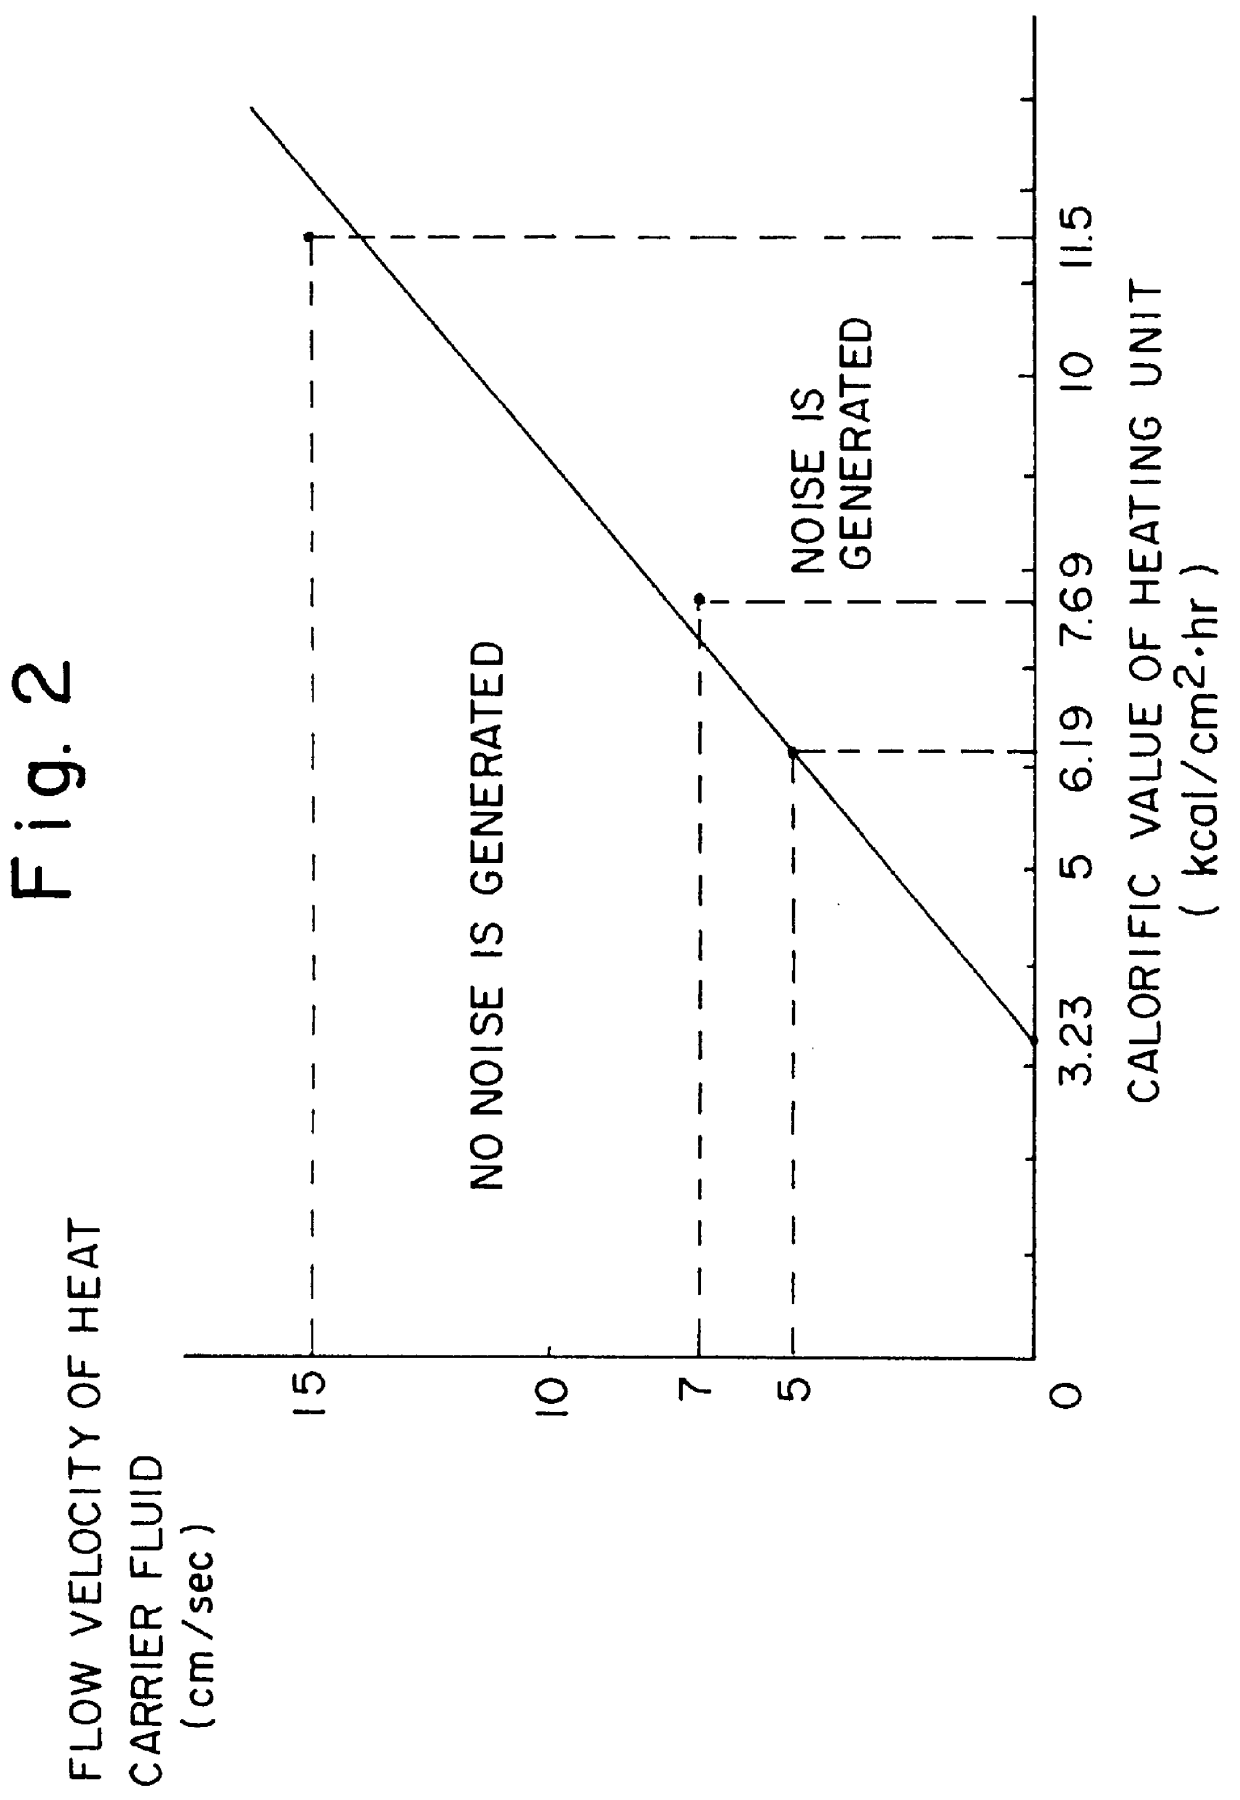 Reduced-pressure steam heating device and method for preventing banging noise generated therein